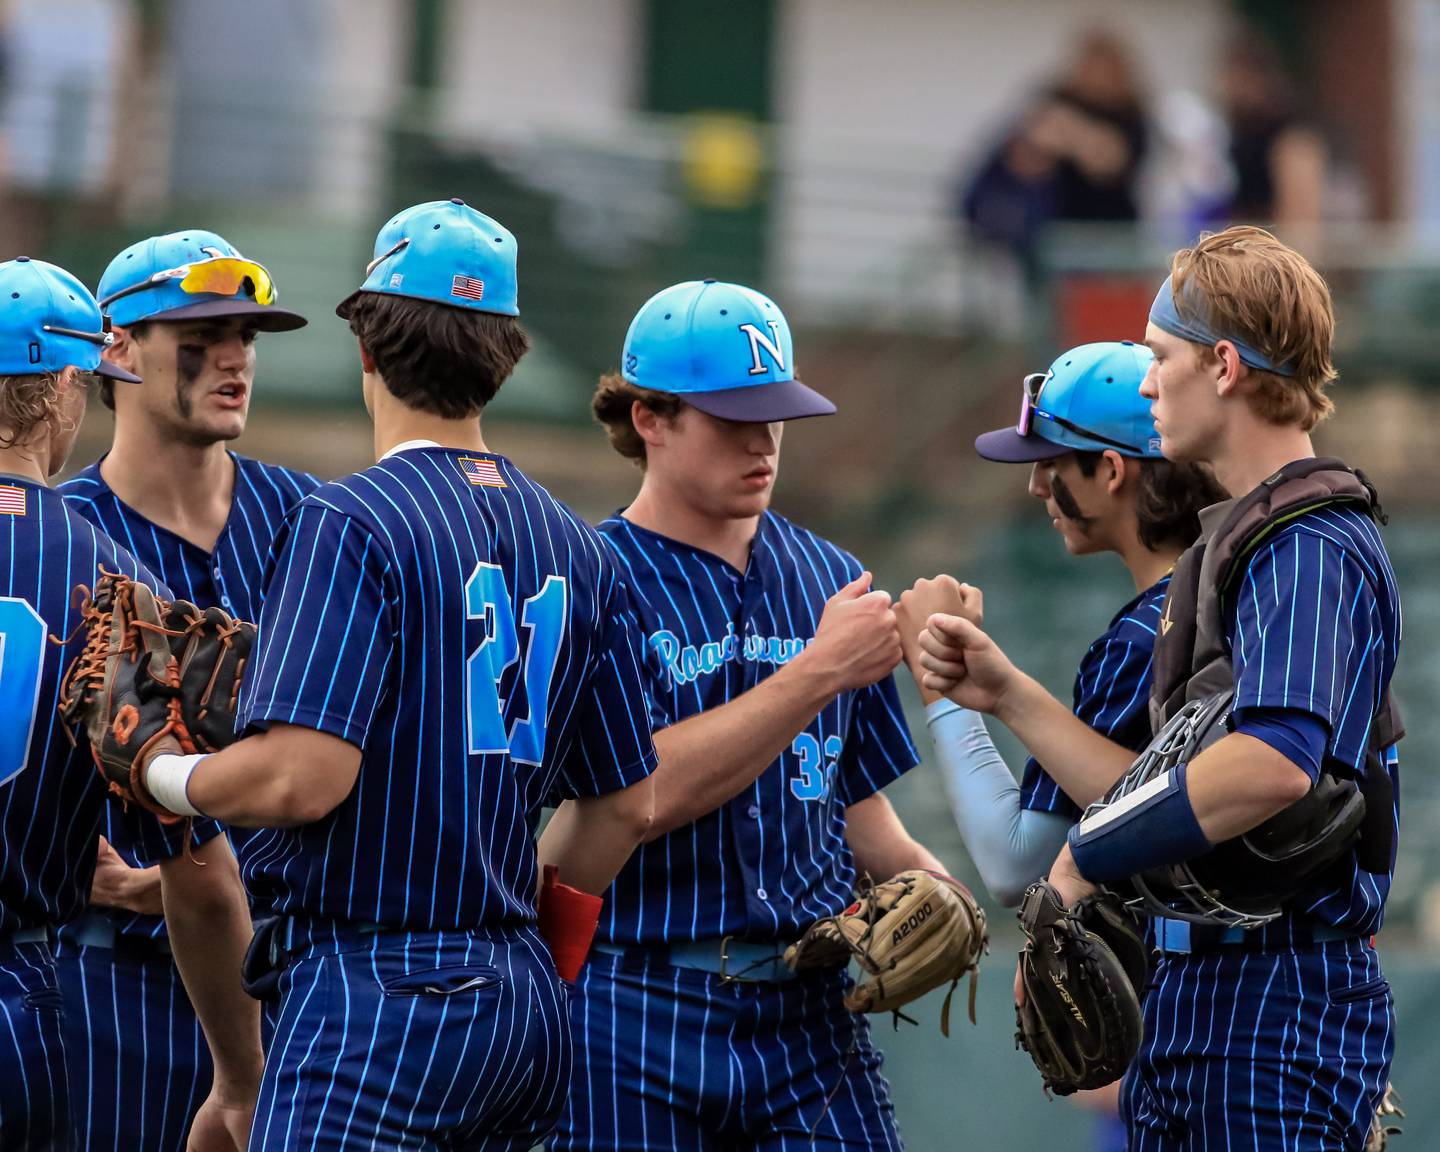 Nazareth's Finn O 'Meara (32) gets encouragement on the mound from his teammates during the Class 3A Crestwood Supersectional game between St. Ignatius at Nazareth.  June 6, 2022.